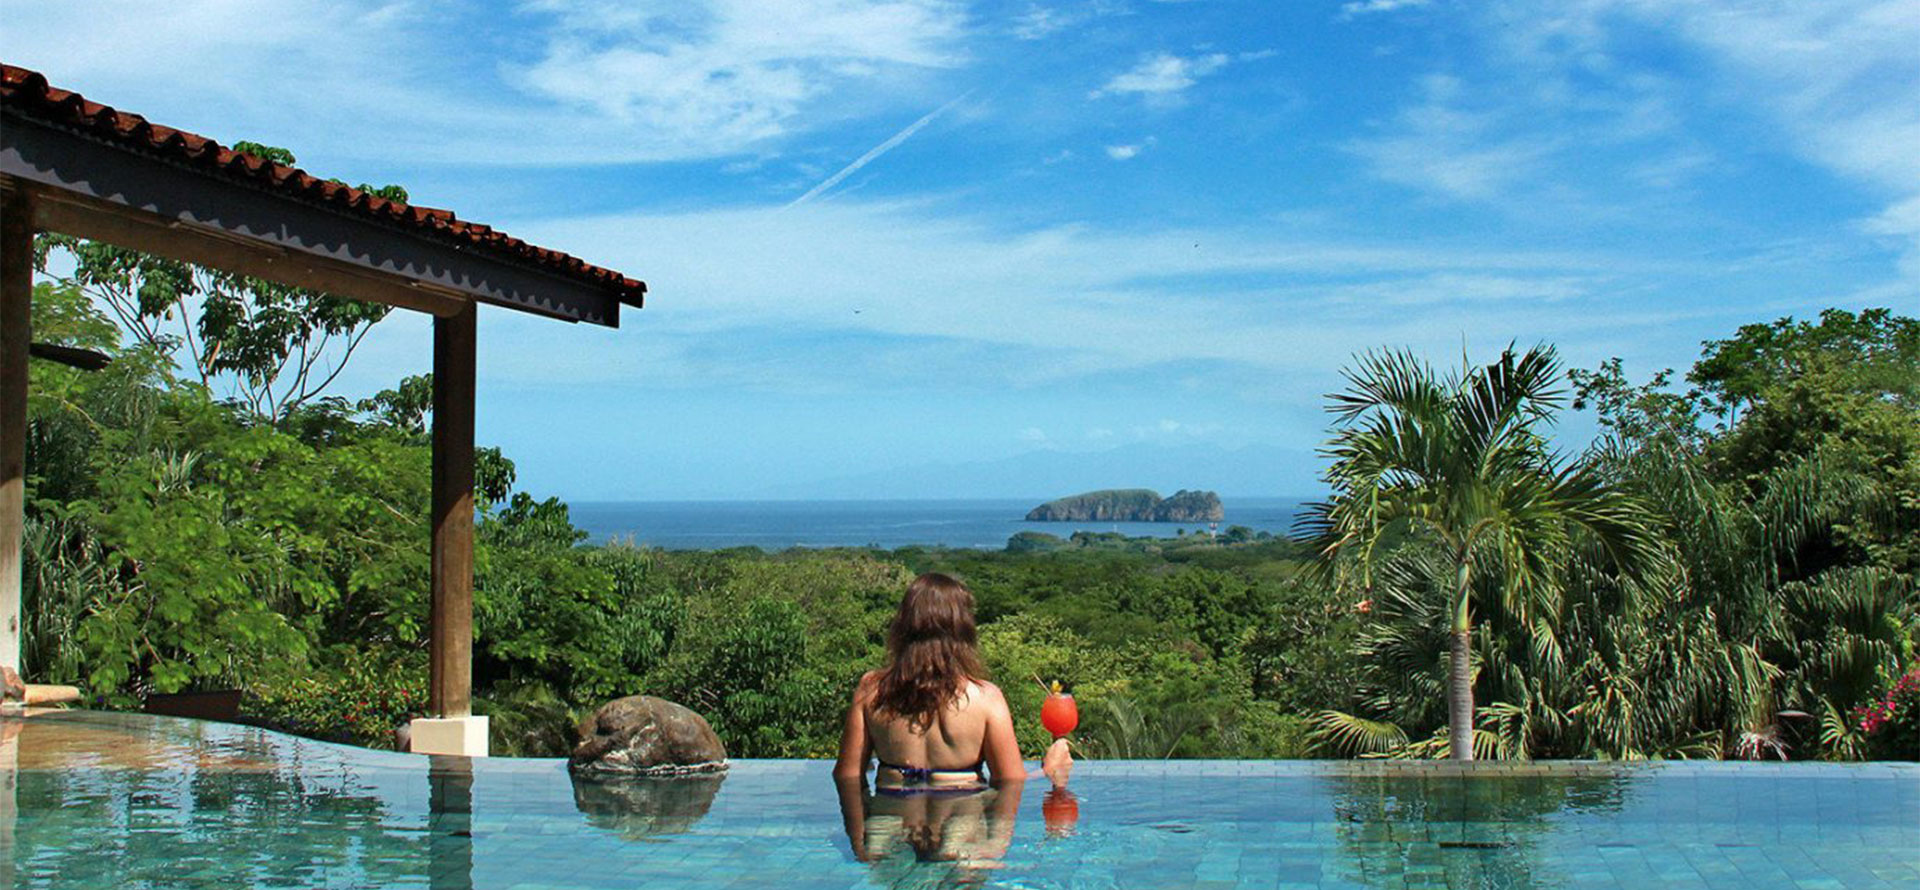 Costa rica all-inclusive adults only resort and woman with coctail.